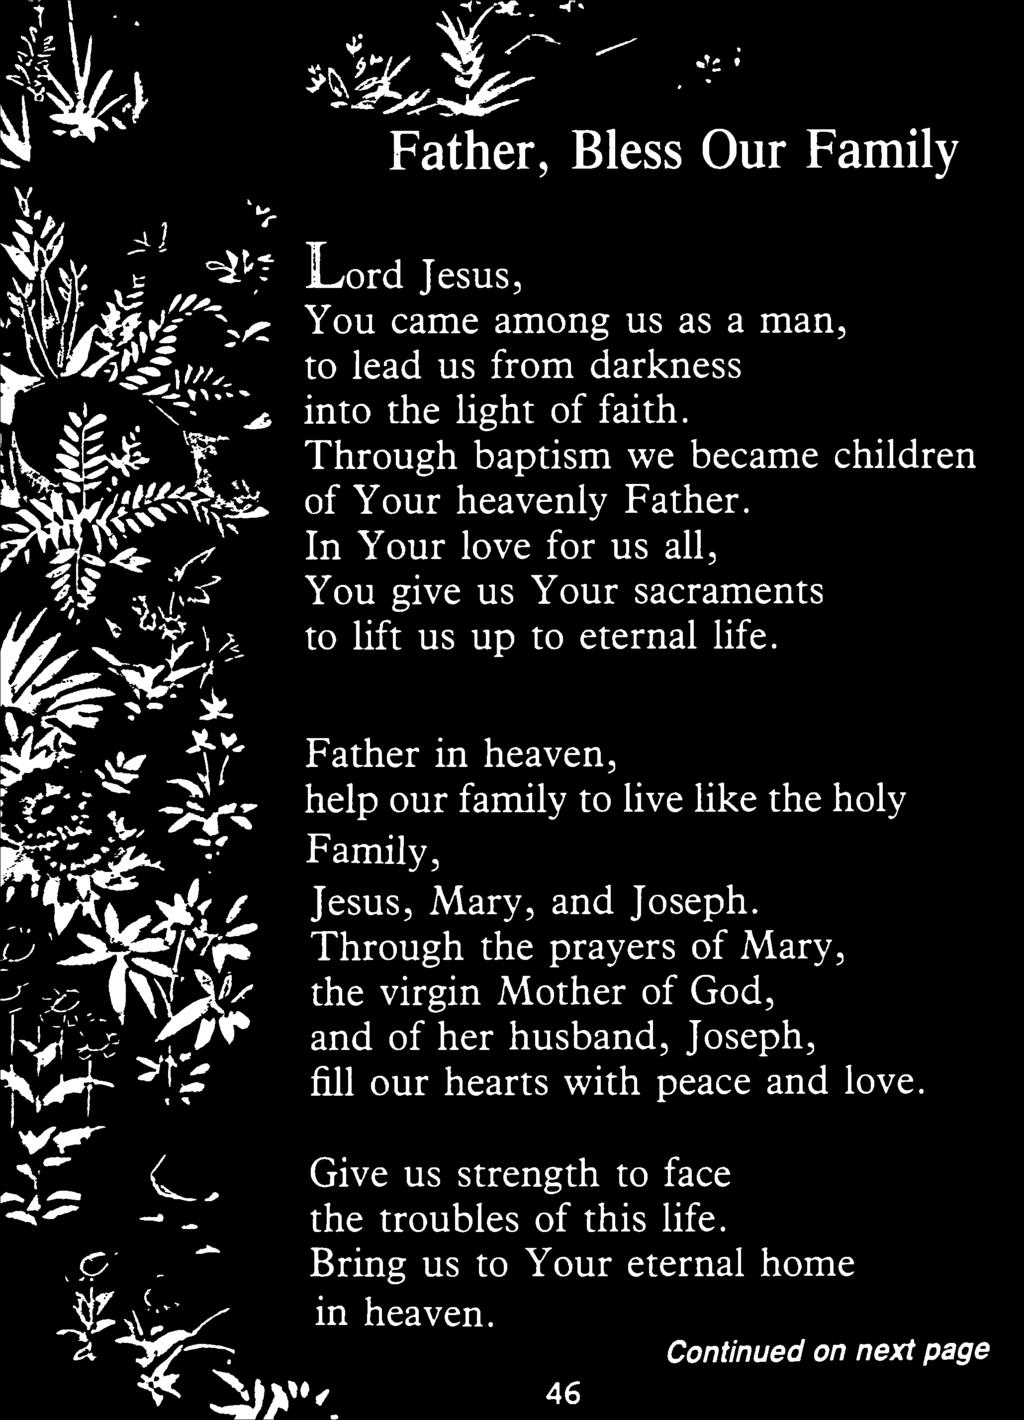 Through the prayers of Mary, the virgin Mother of God, and of her husband, Joseph, fill our hearts